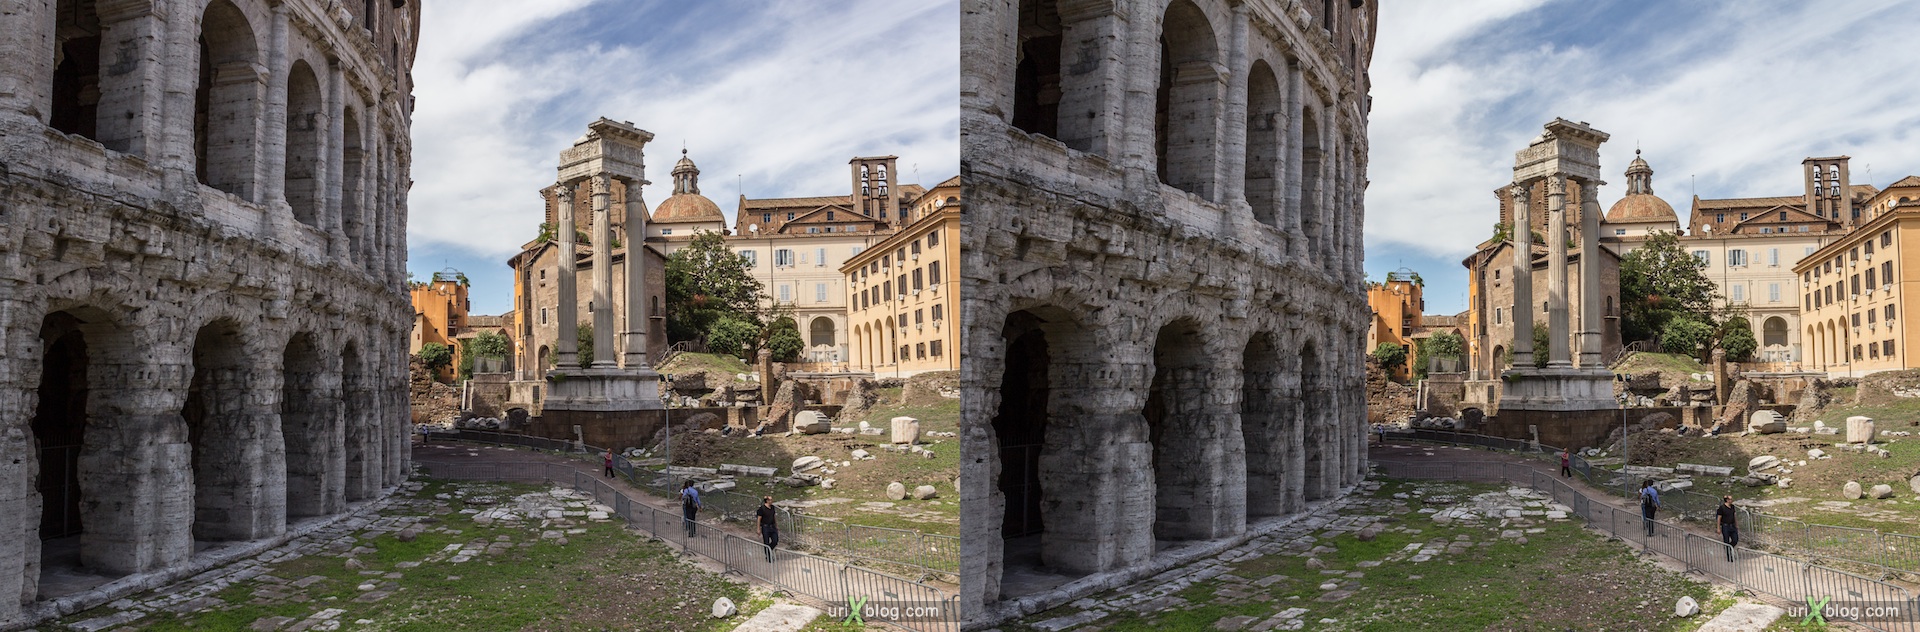 2012, Theater of Marcellus, Temple of Apollo Sosianus, Rome, Italy, 3D, stereo pair, cross-eyed, crossview, cross view stereo pair